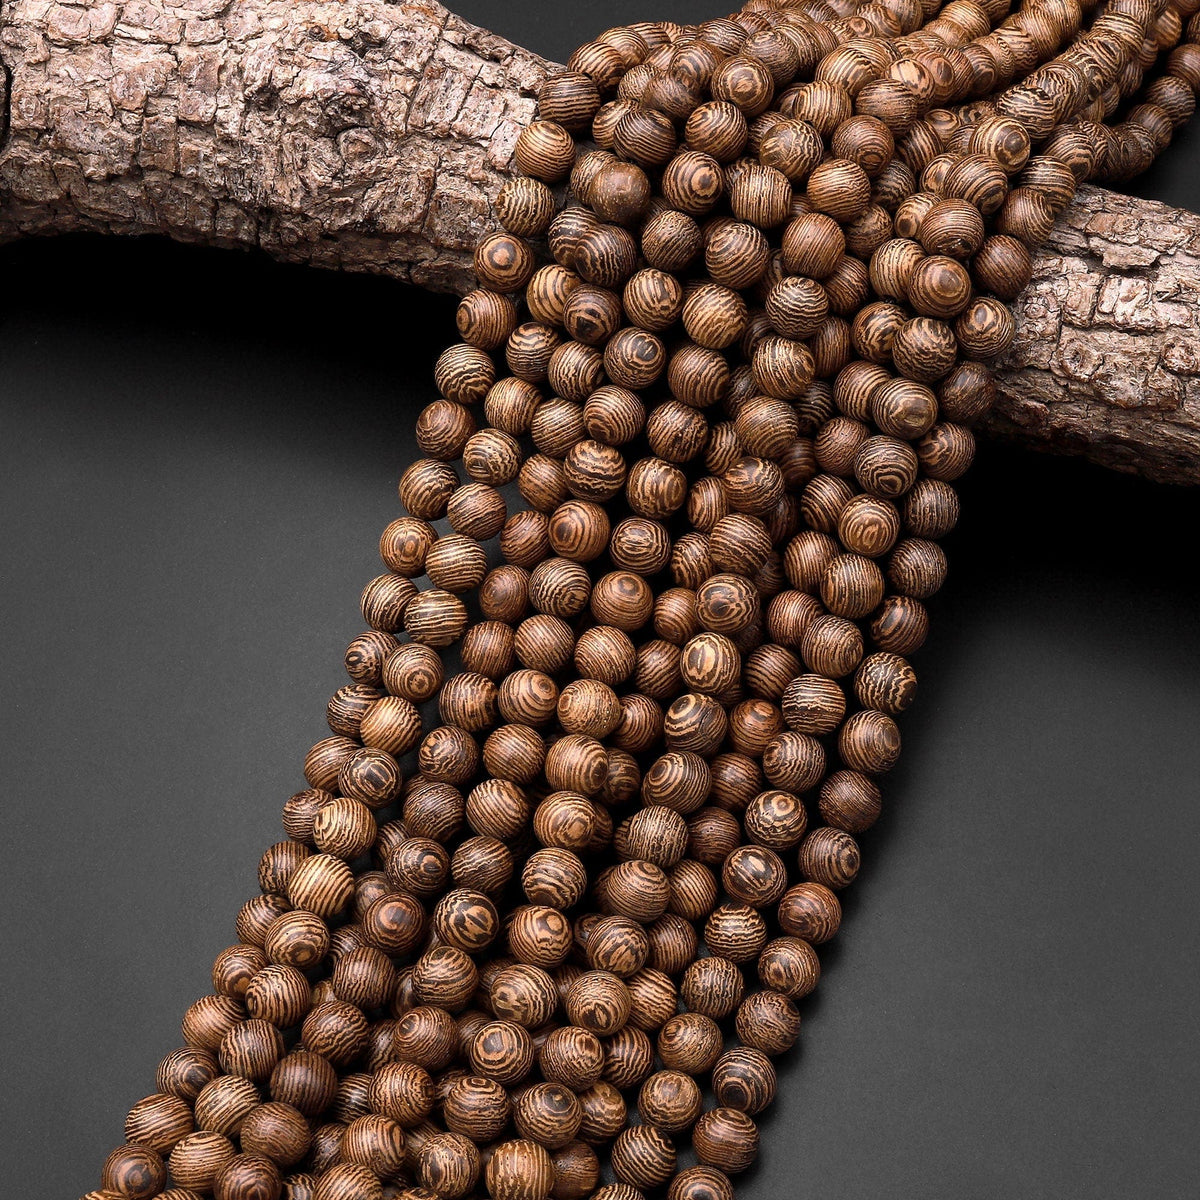  300pcs 10mm Dark Brown Wenge Wood Beads Natural Macrame Round  Wood Bead Round Ball Bead Wooden Beads for Bracelets and Jewelry Making :  Arts, Crafts & Sewing